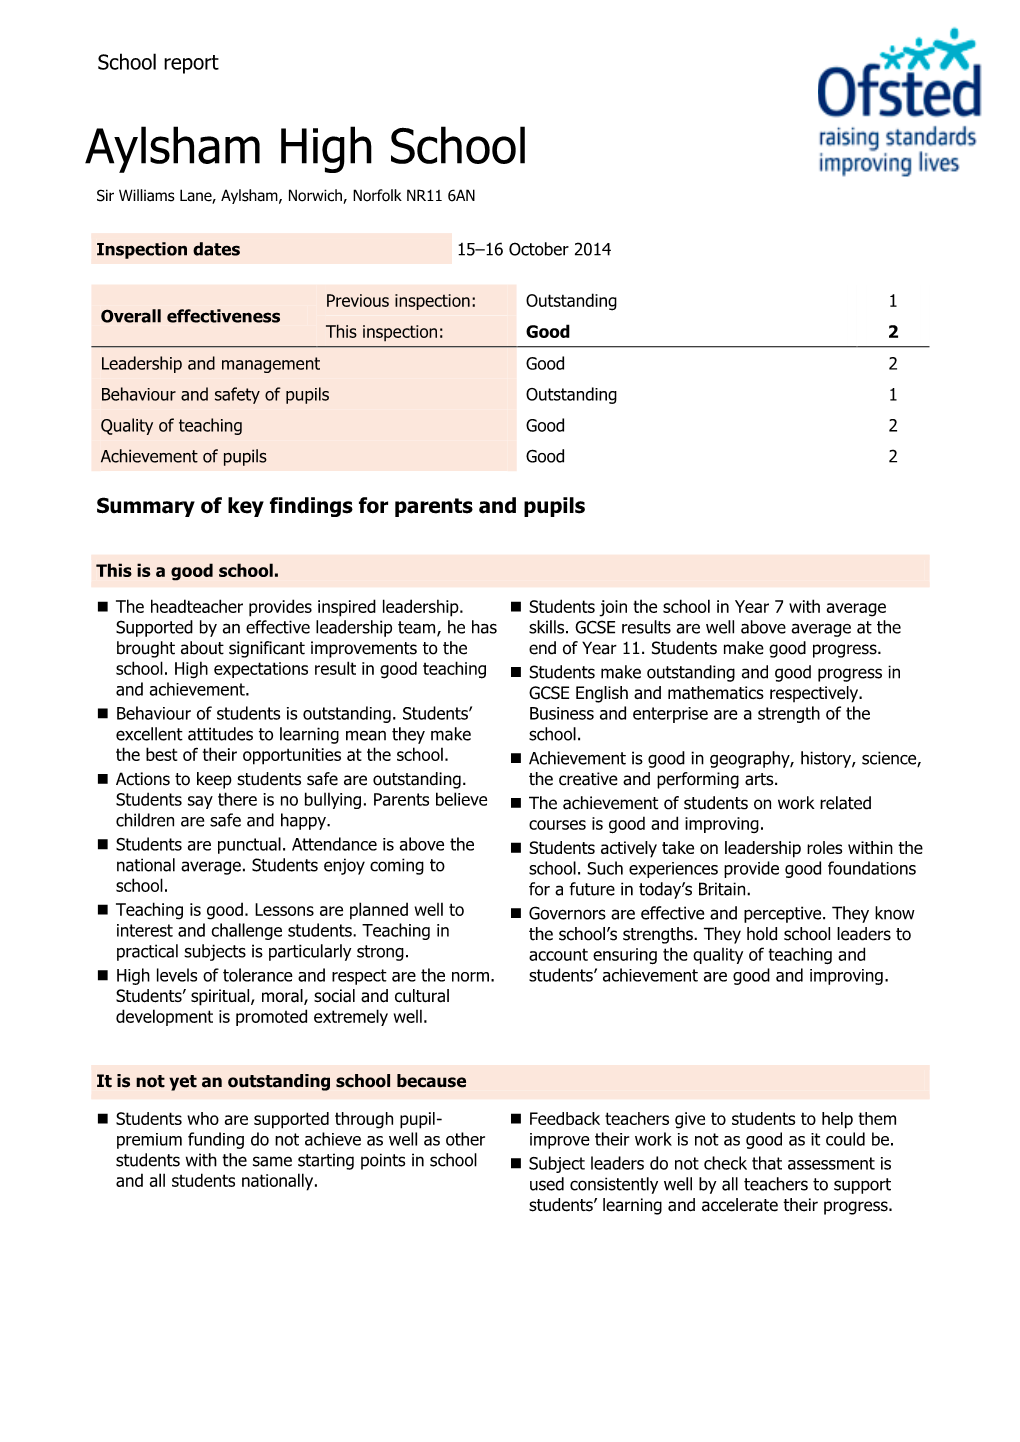 Ofsted Report October 2014